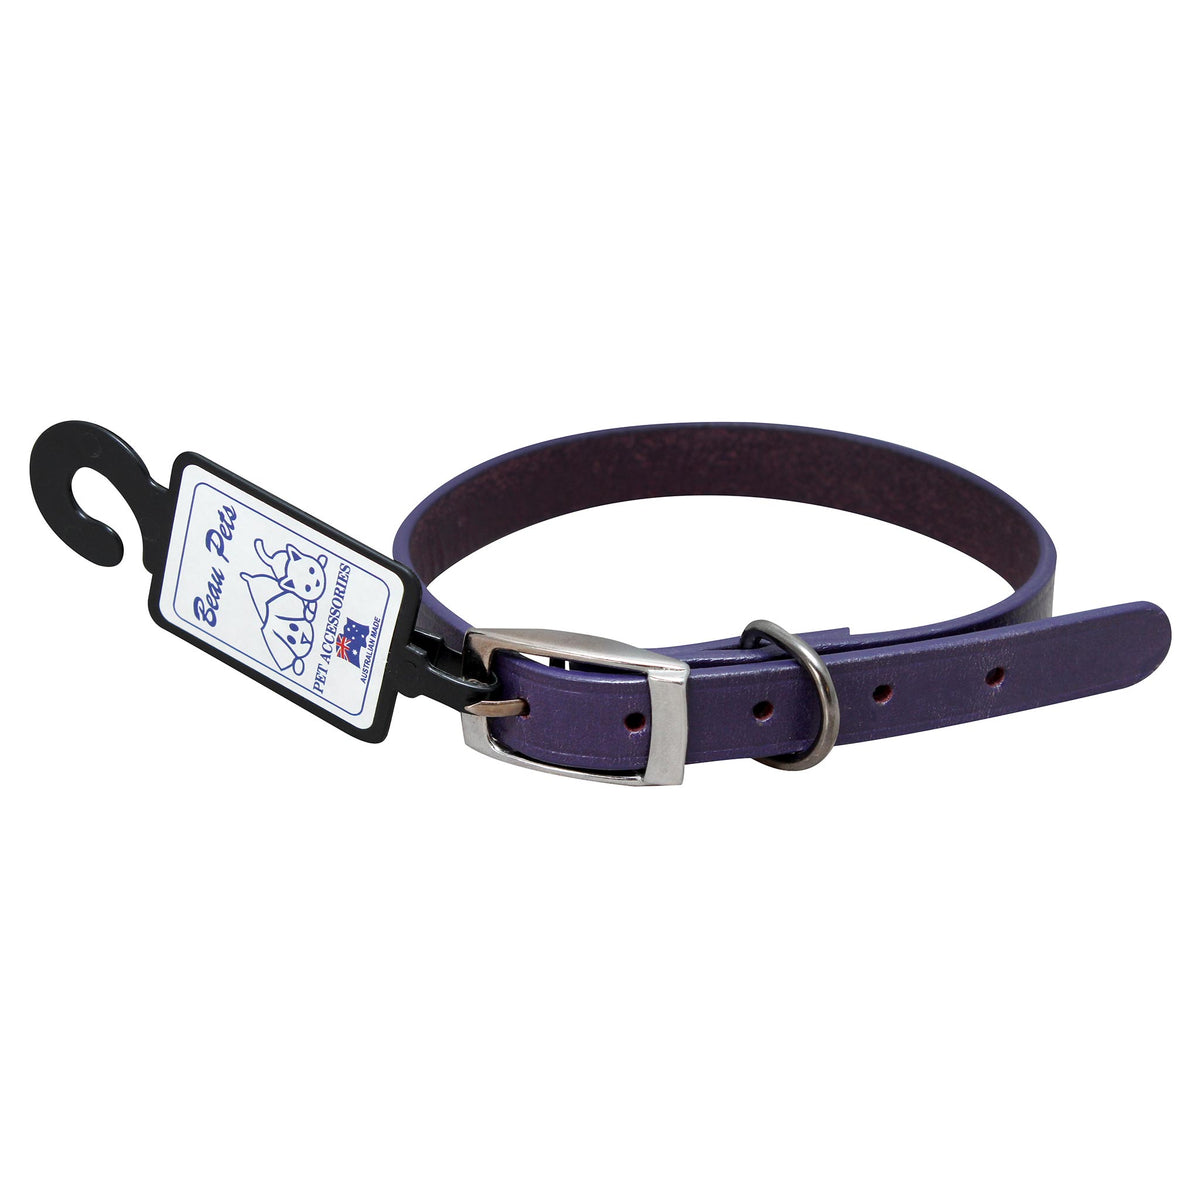 Deluxe Plain Leather Dog Collar by Beau Pets